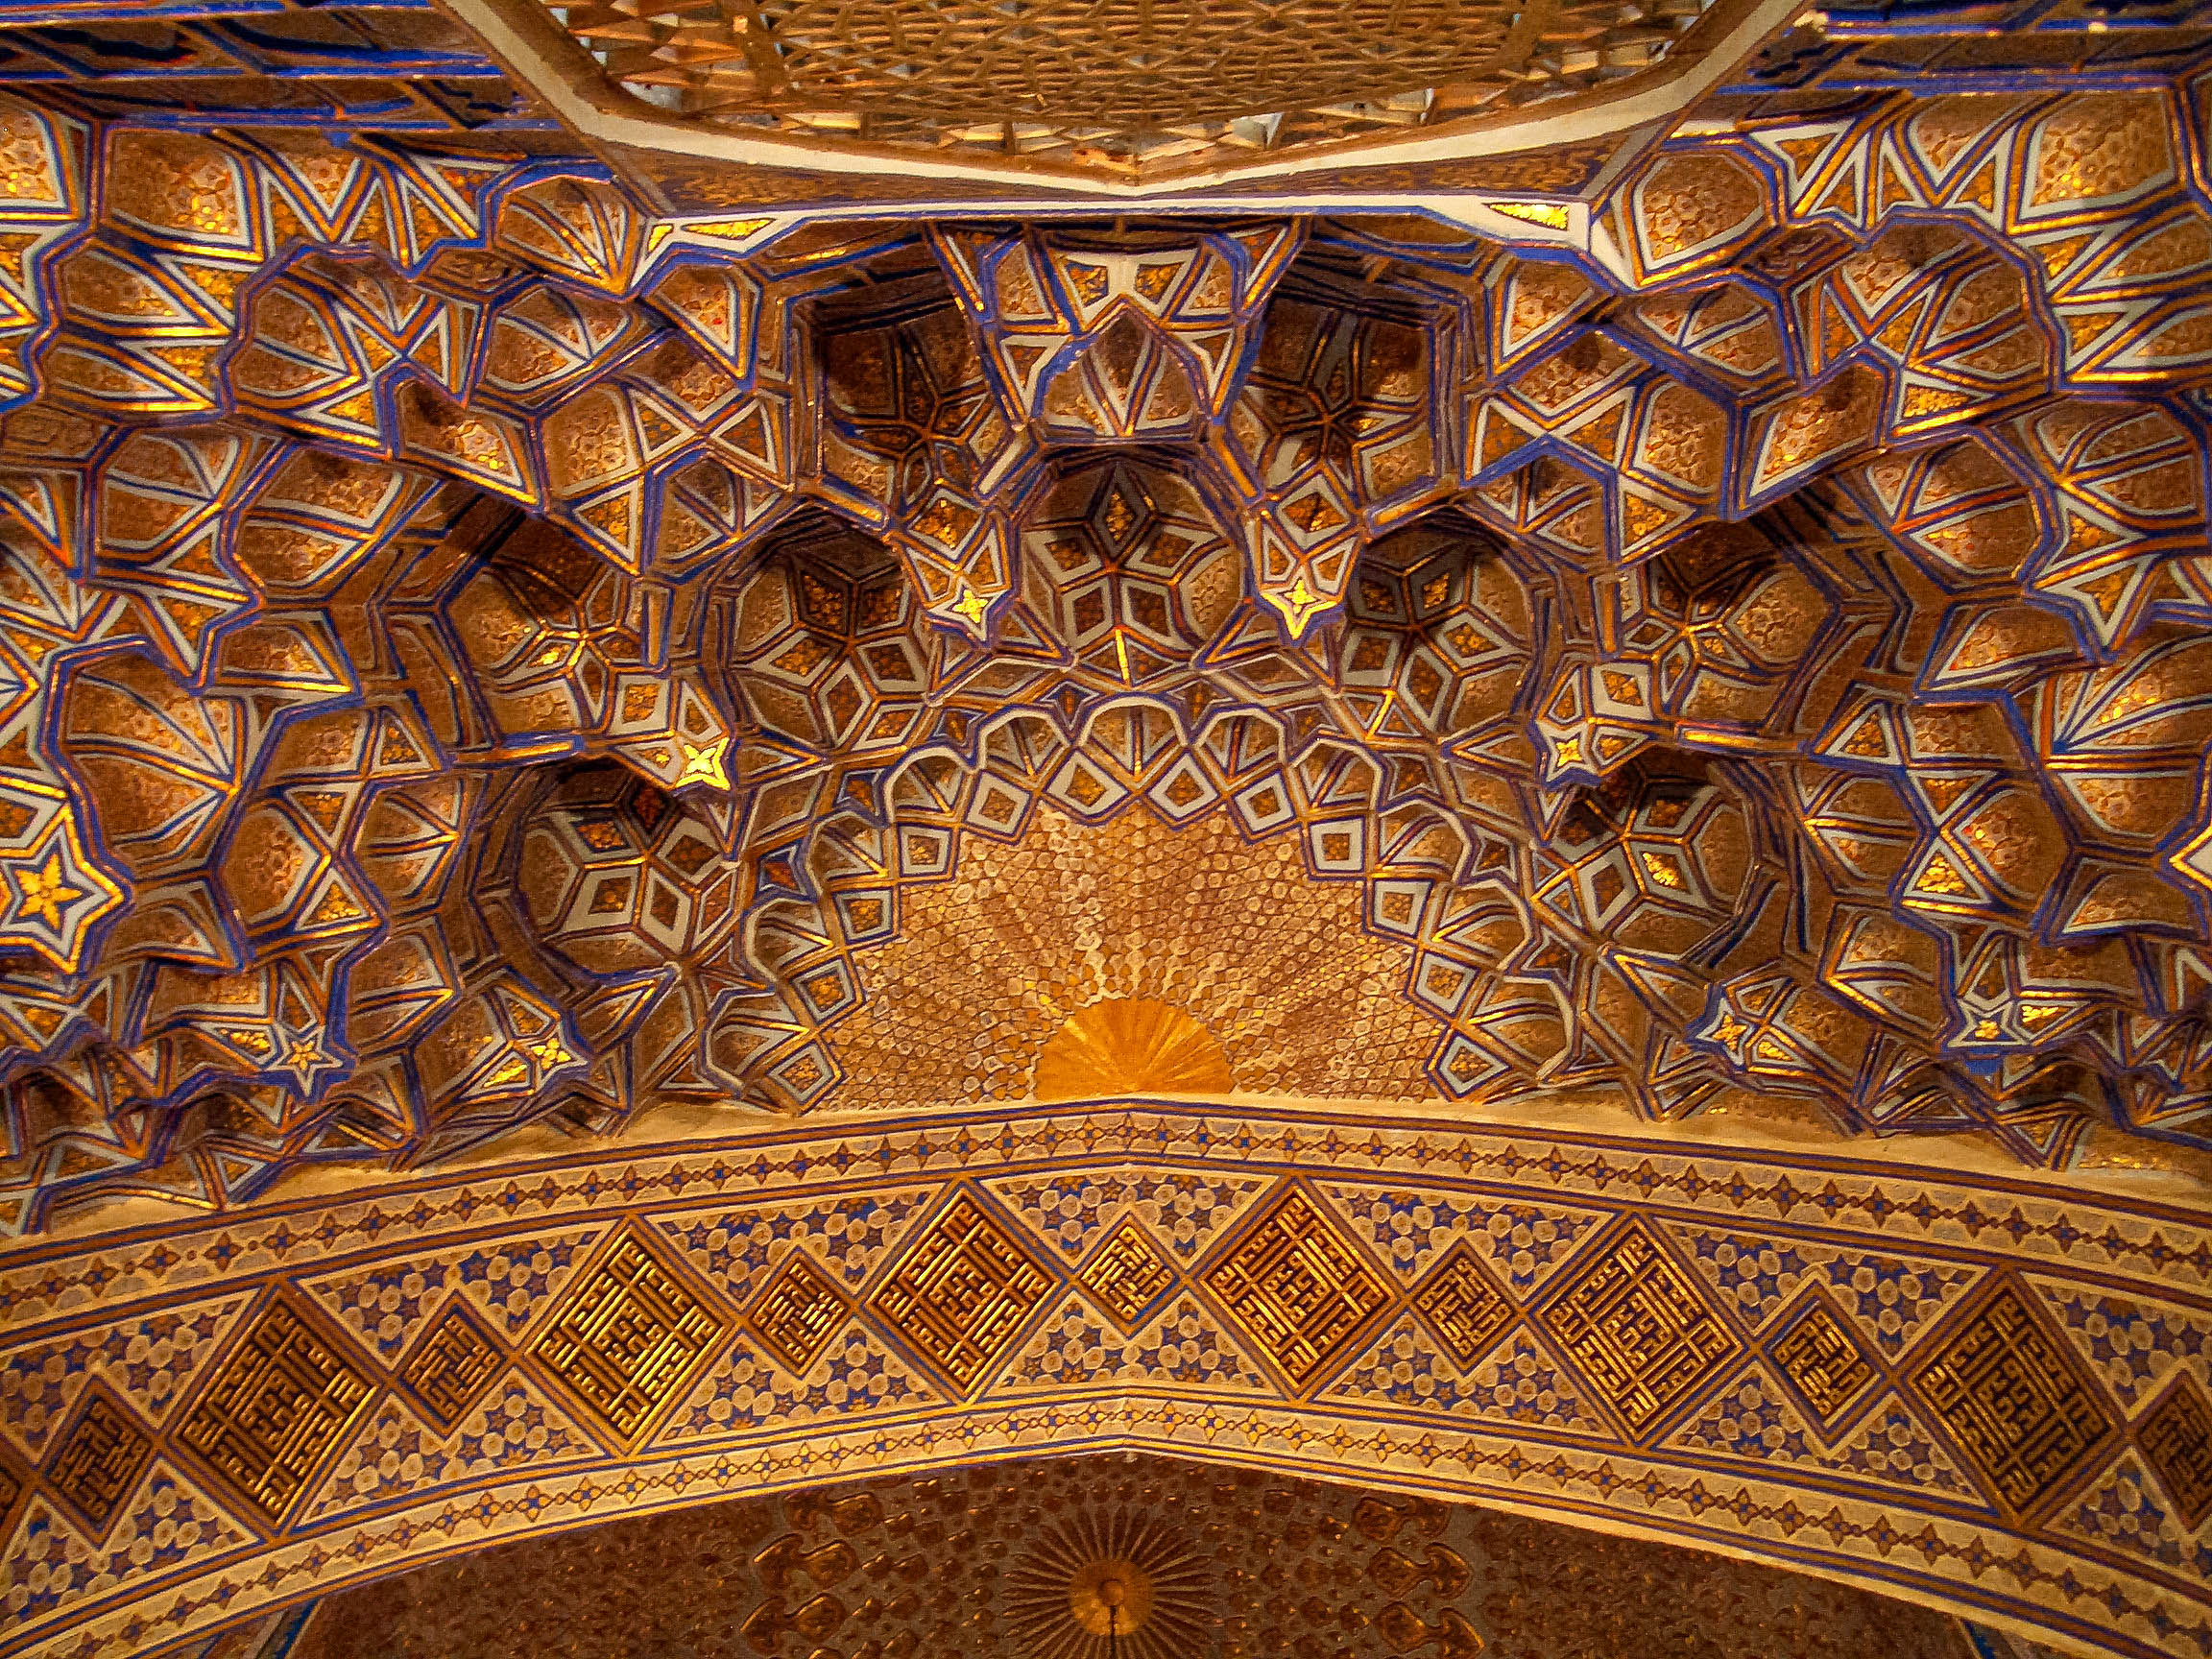 The Muqarnas: A three-dimensional geometric composition